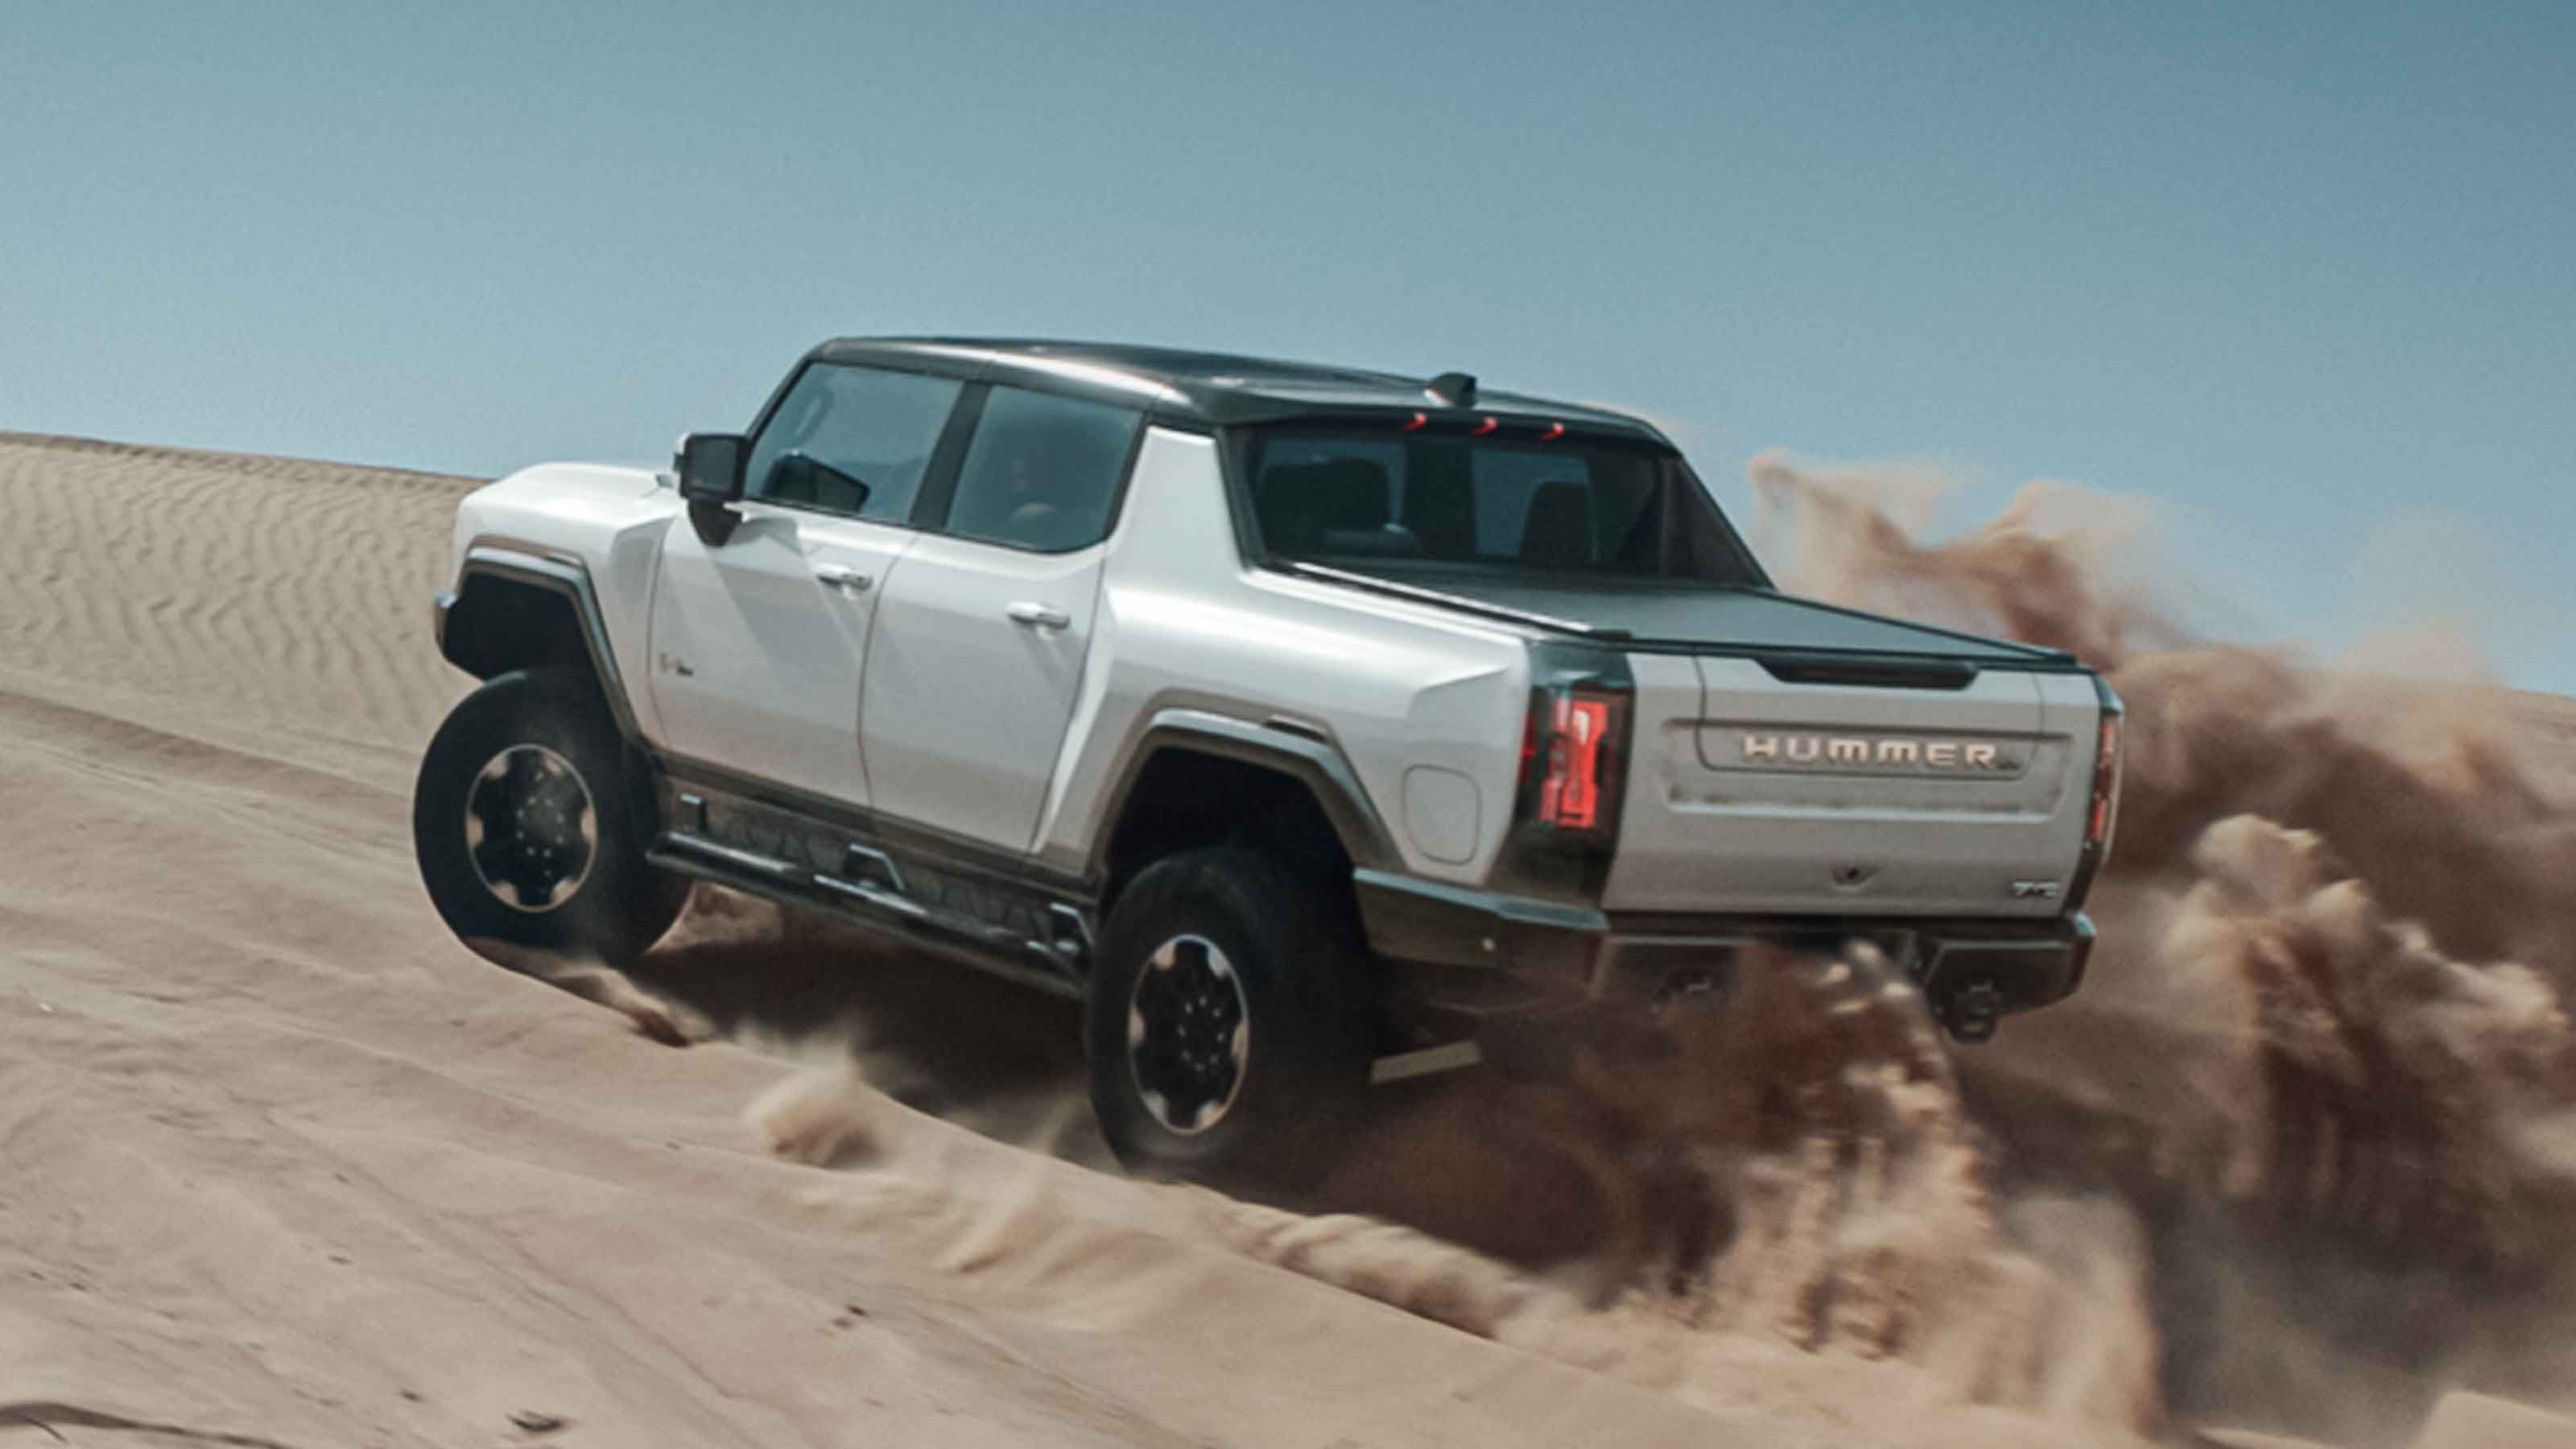 GMC Hummer EV electric vehicle in the desert